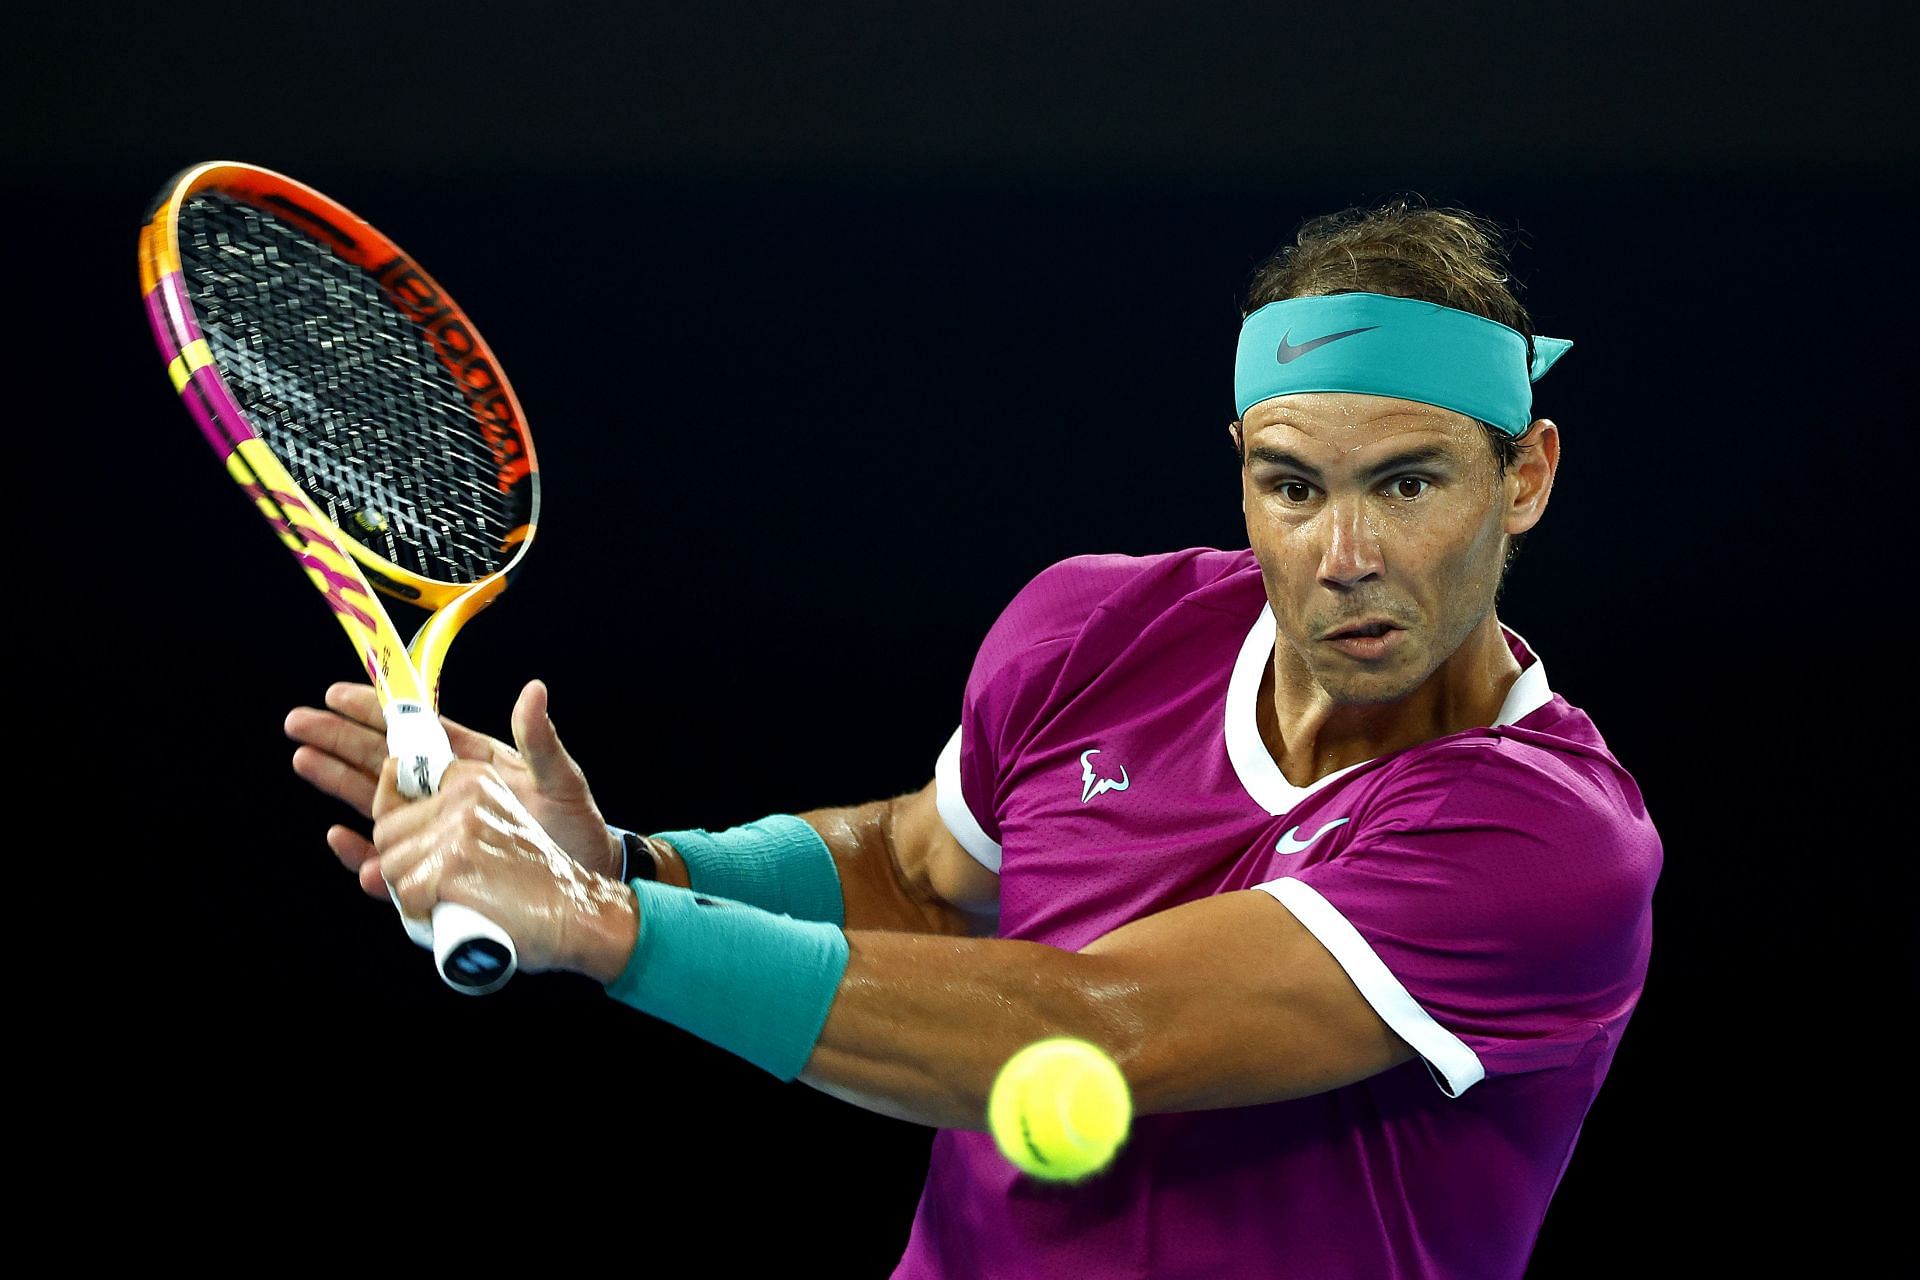 Rafael Nadal will return to action at the Indian Wells Masters after his Australian Open triumph